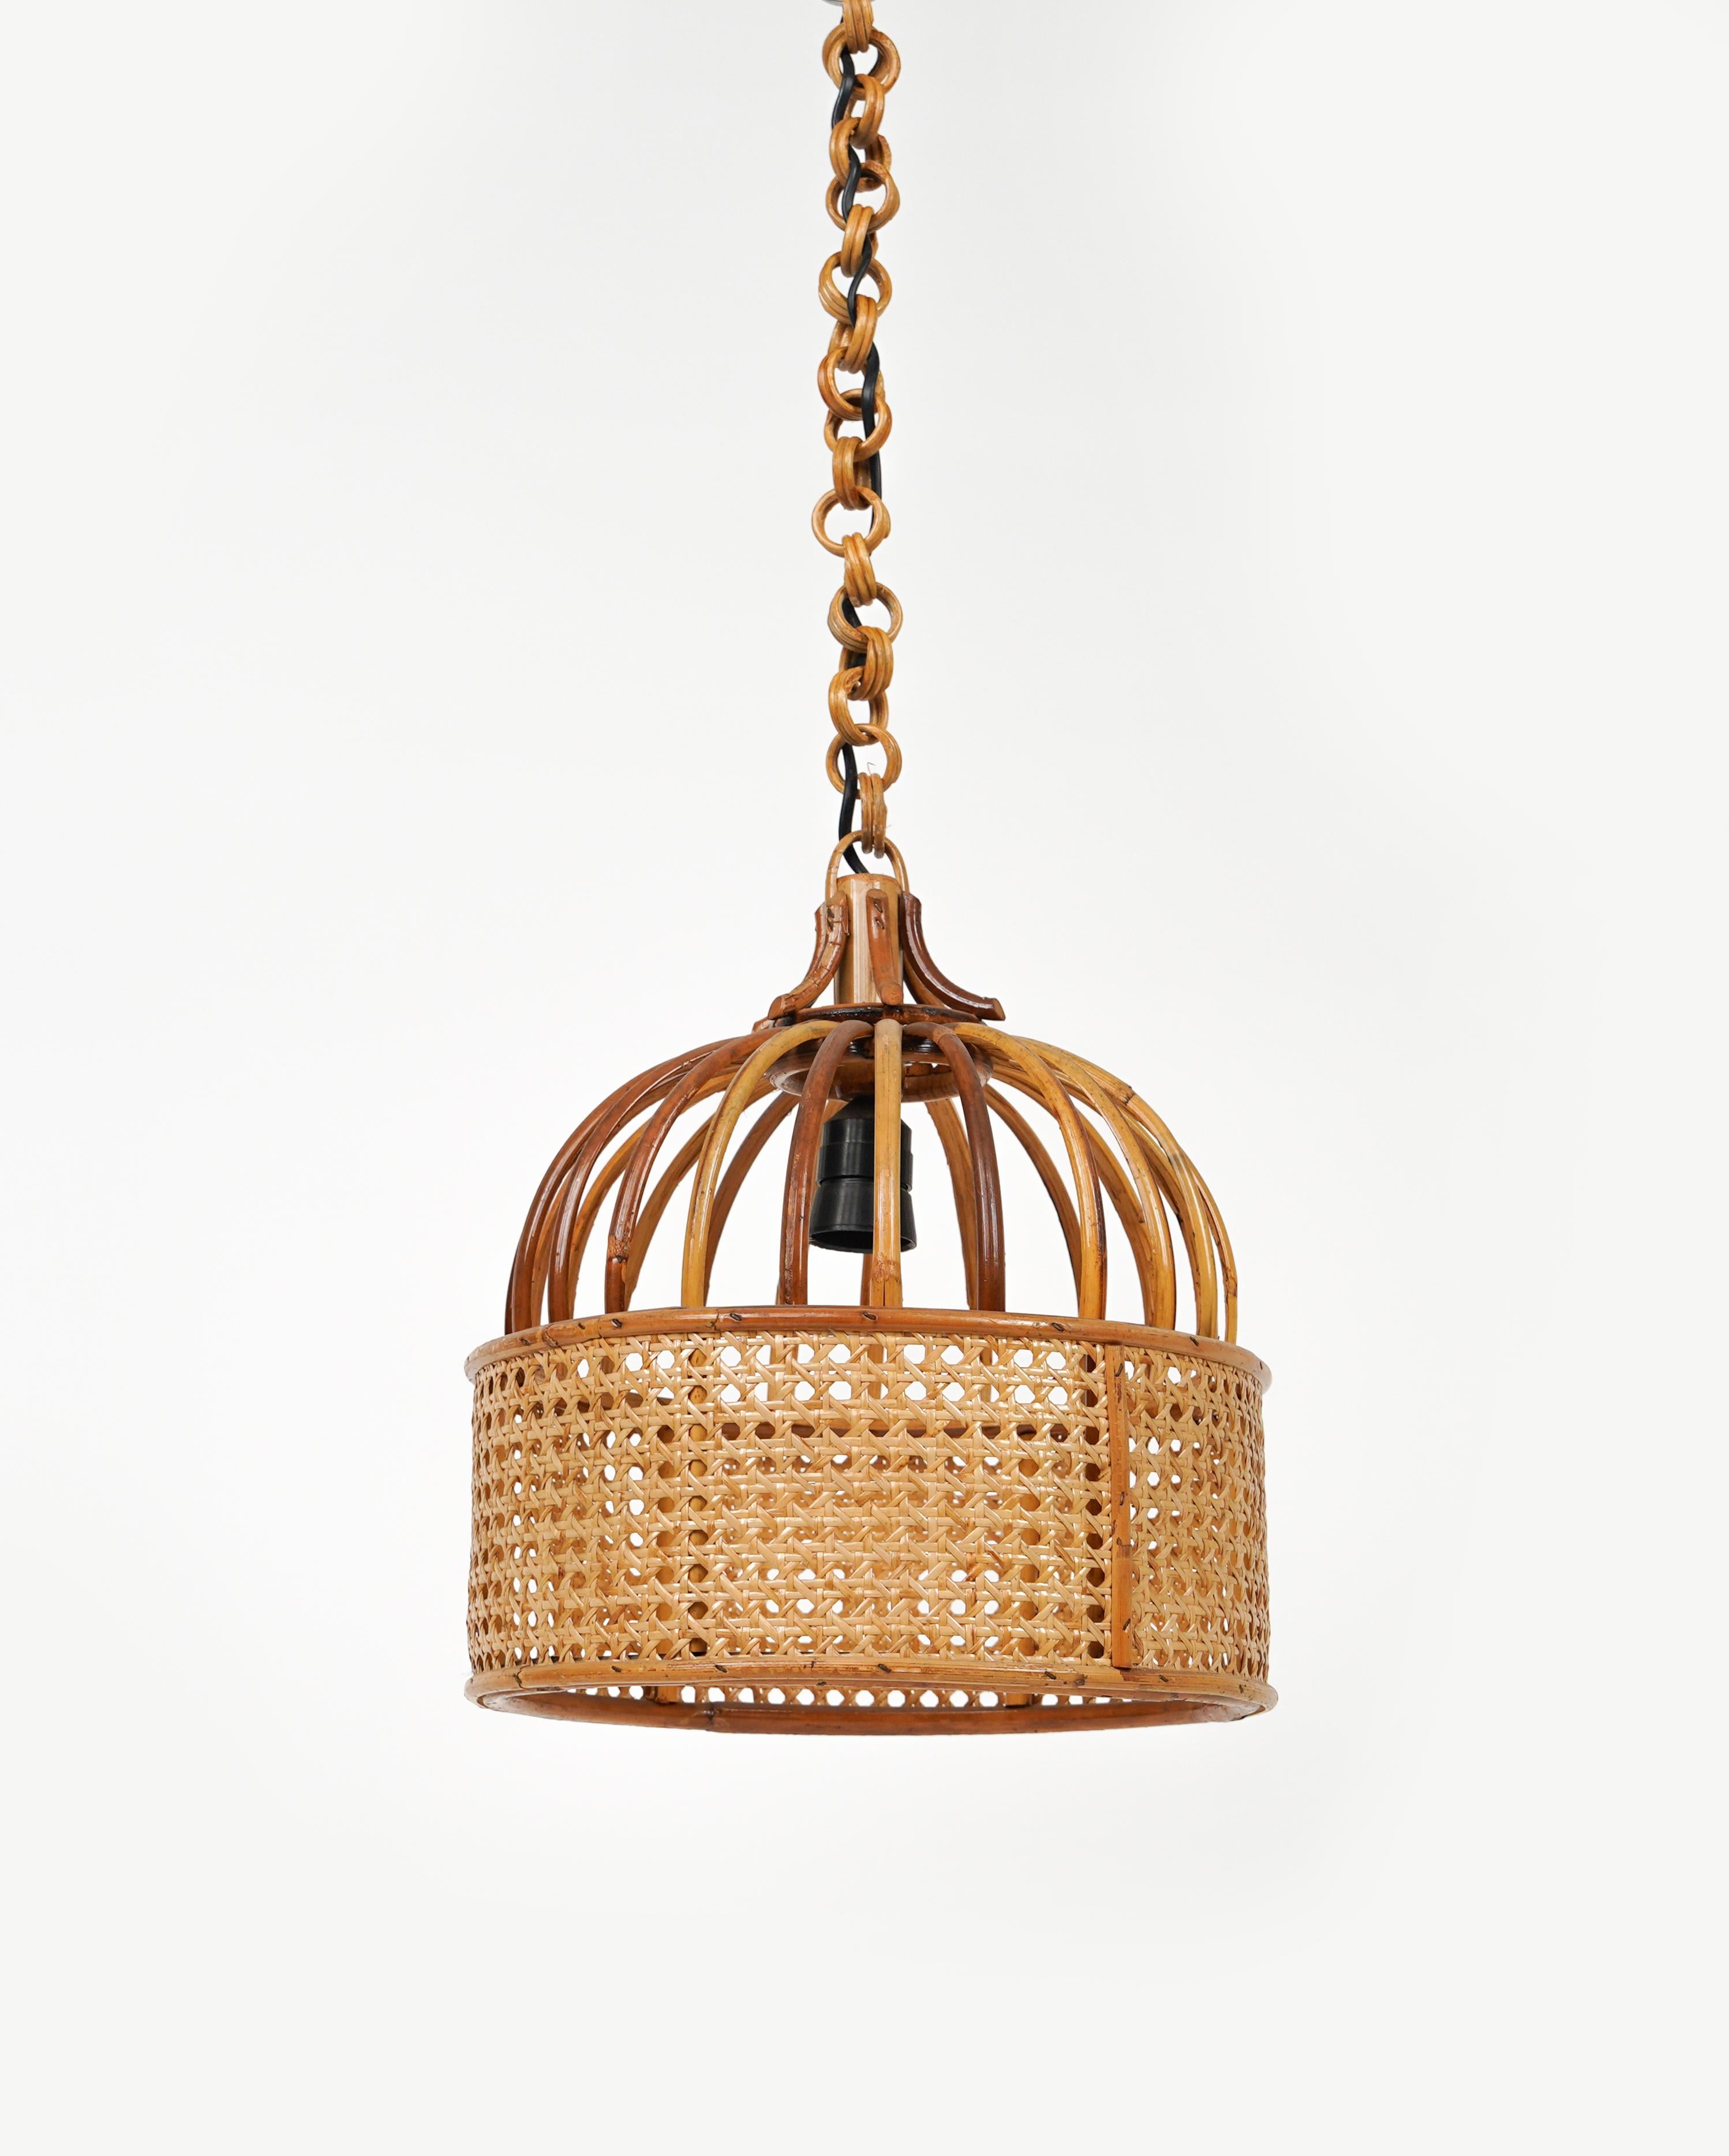 Wonderful pendant rattan and wicker chandelier in the French Riviera style.

This incredible piece was made in Italy in the 1970s.   

This chandelier is perfect for a mid-century living room or kitchen.